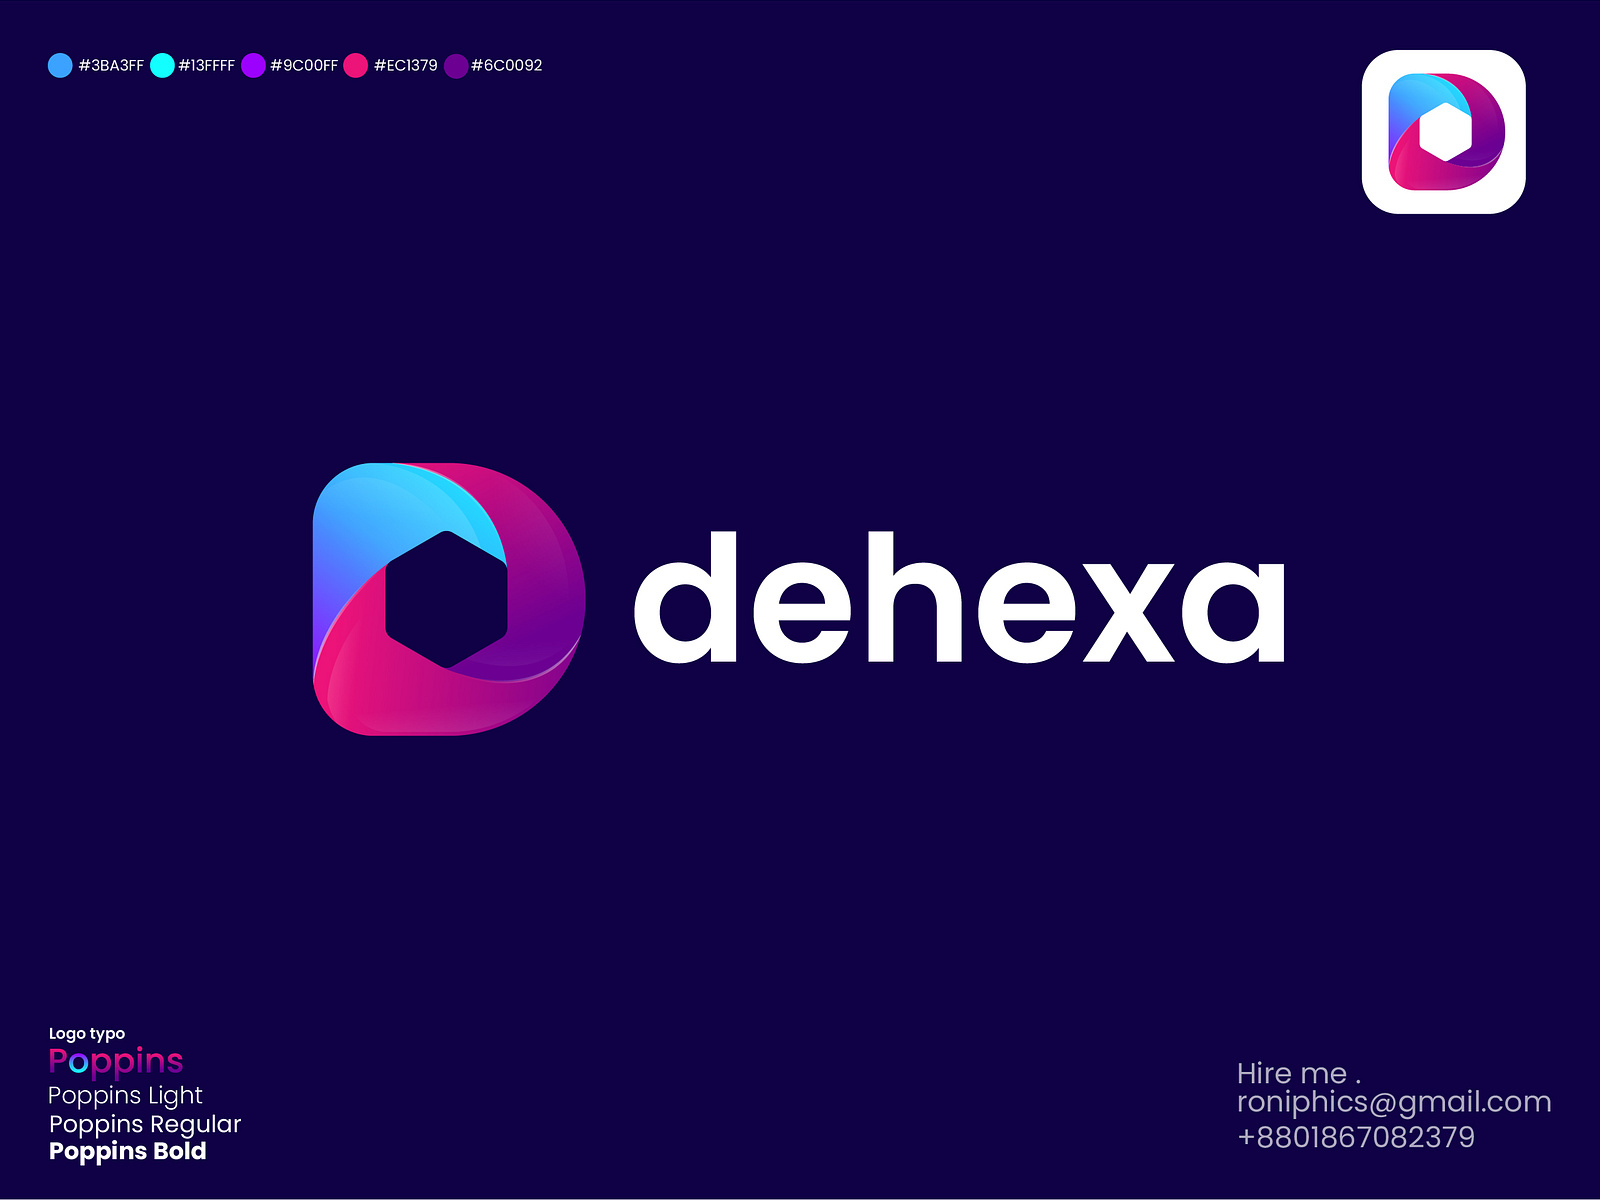 Hexagon With Letter D Logo by Roniphics on Dribbble